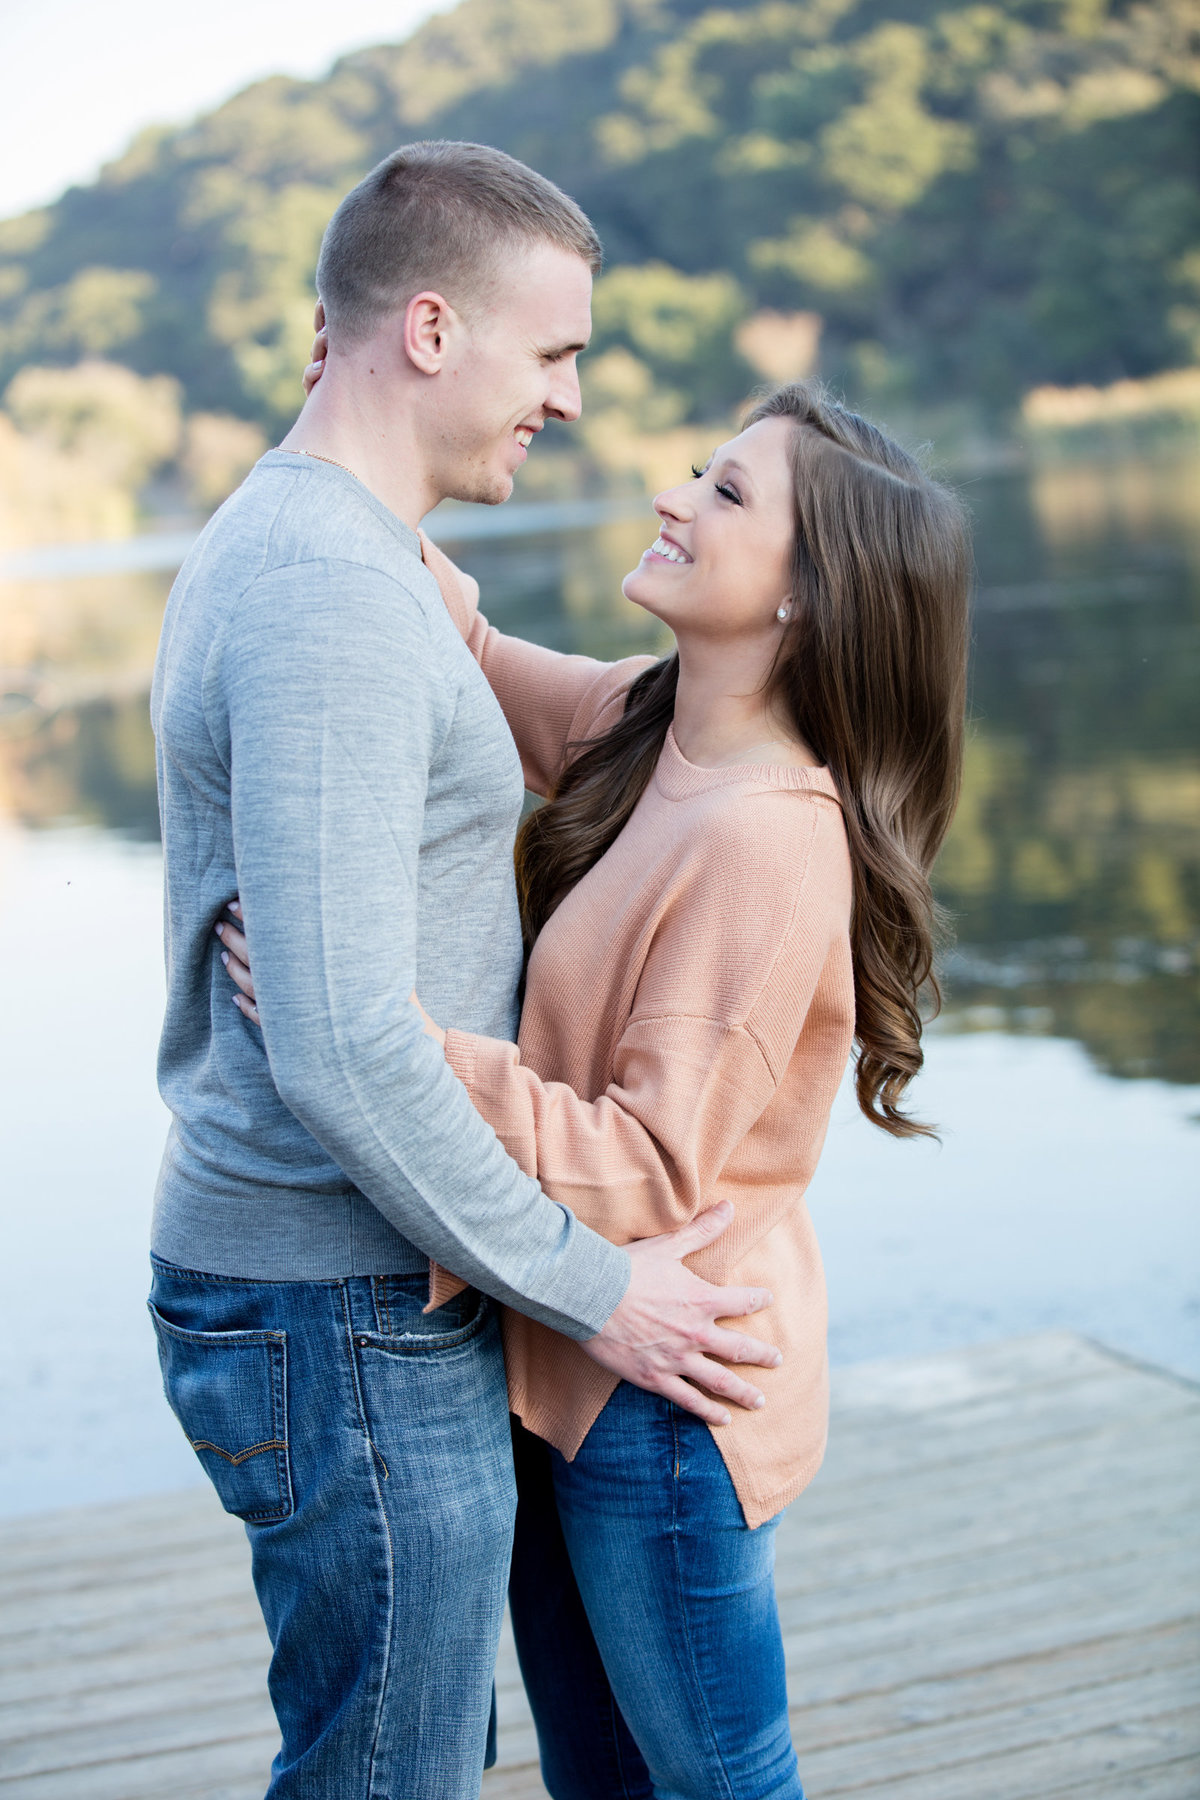 Foothills Park in Palo Alto Photographing this Cute Couples Engagement Photos